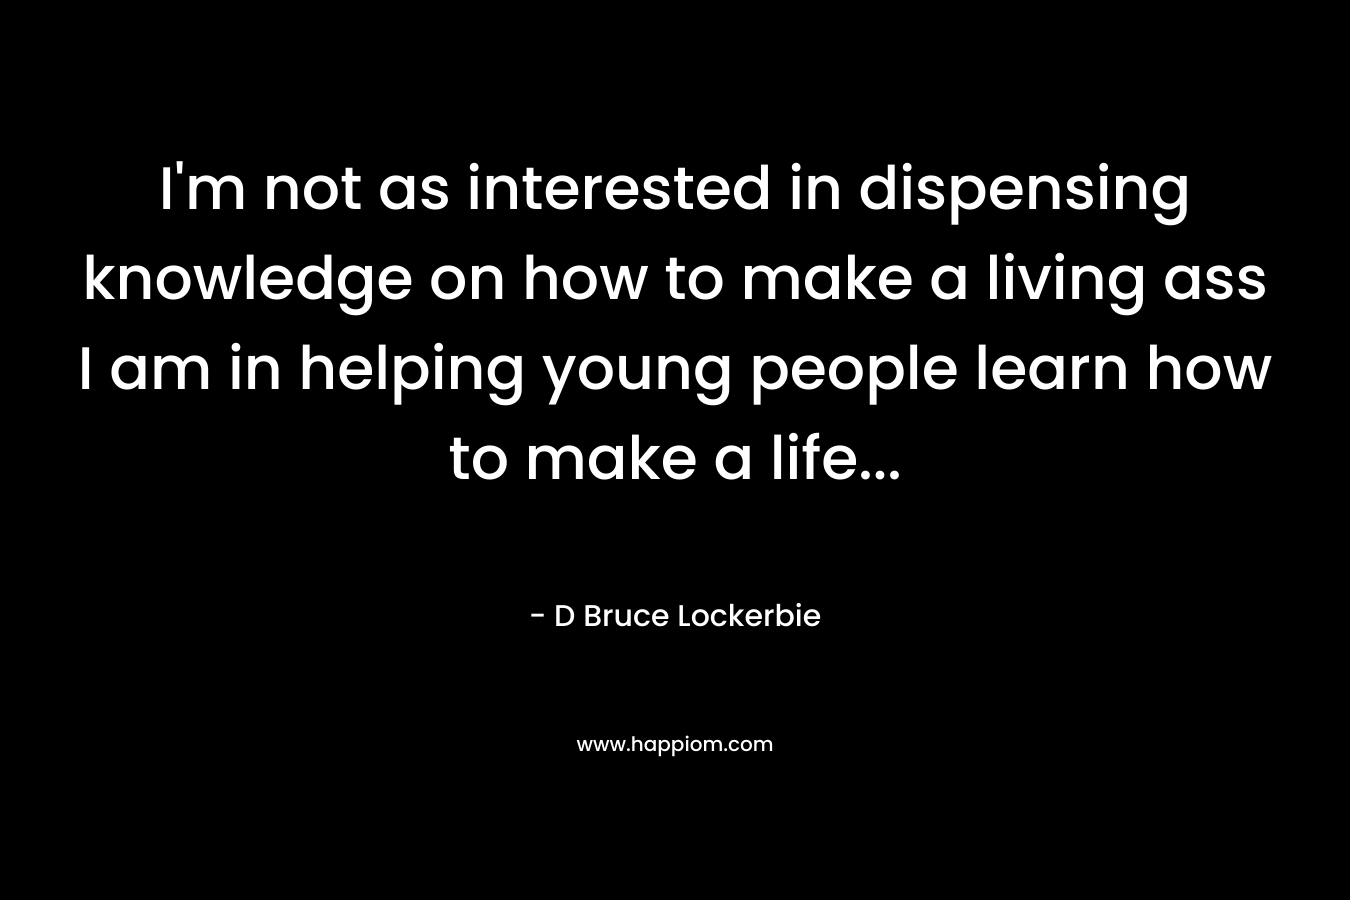 I'm not as interested in dispensing knowledge on how to make a living ass I am in helping young people learn how to make a life...